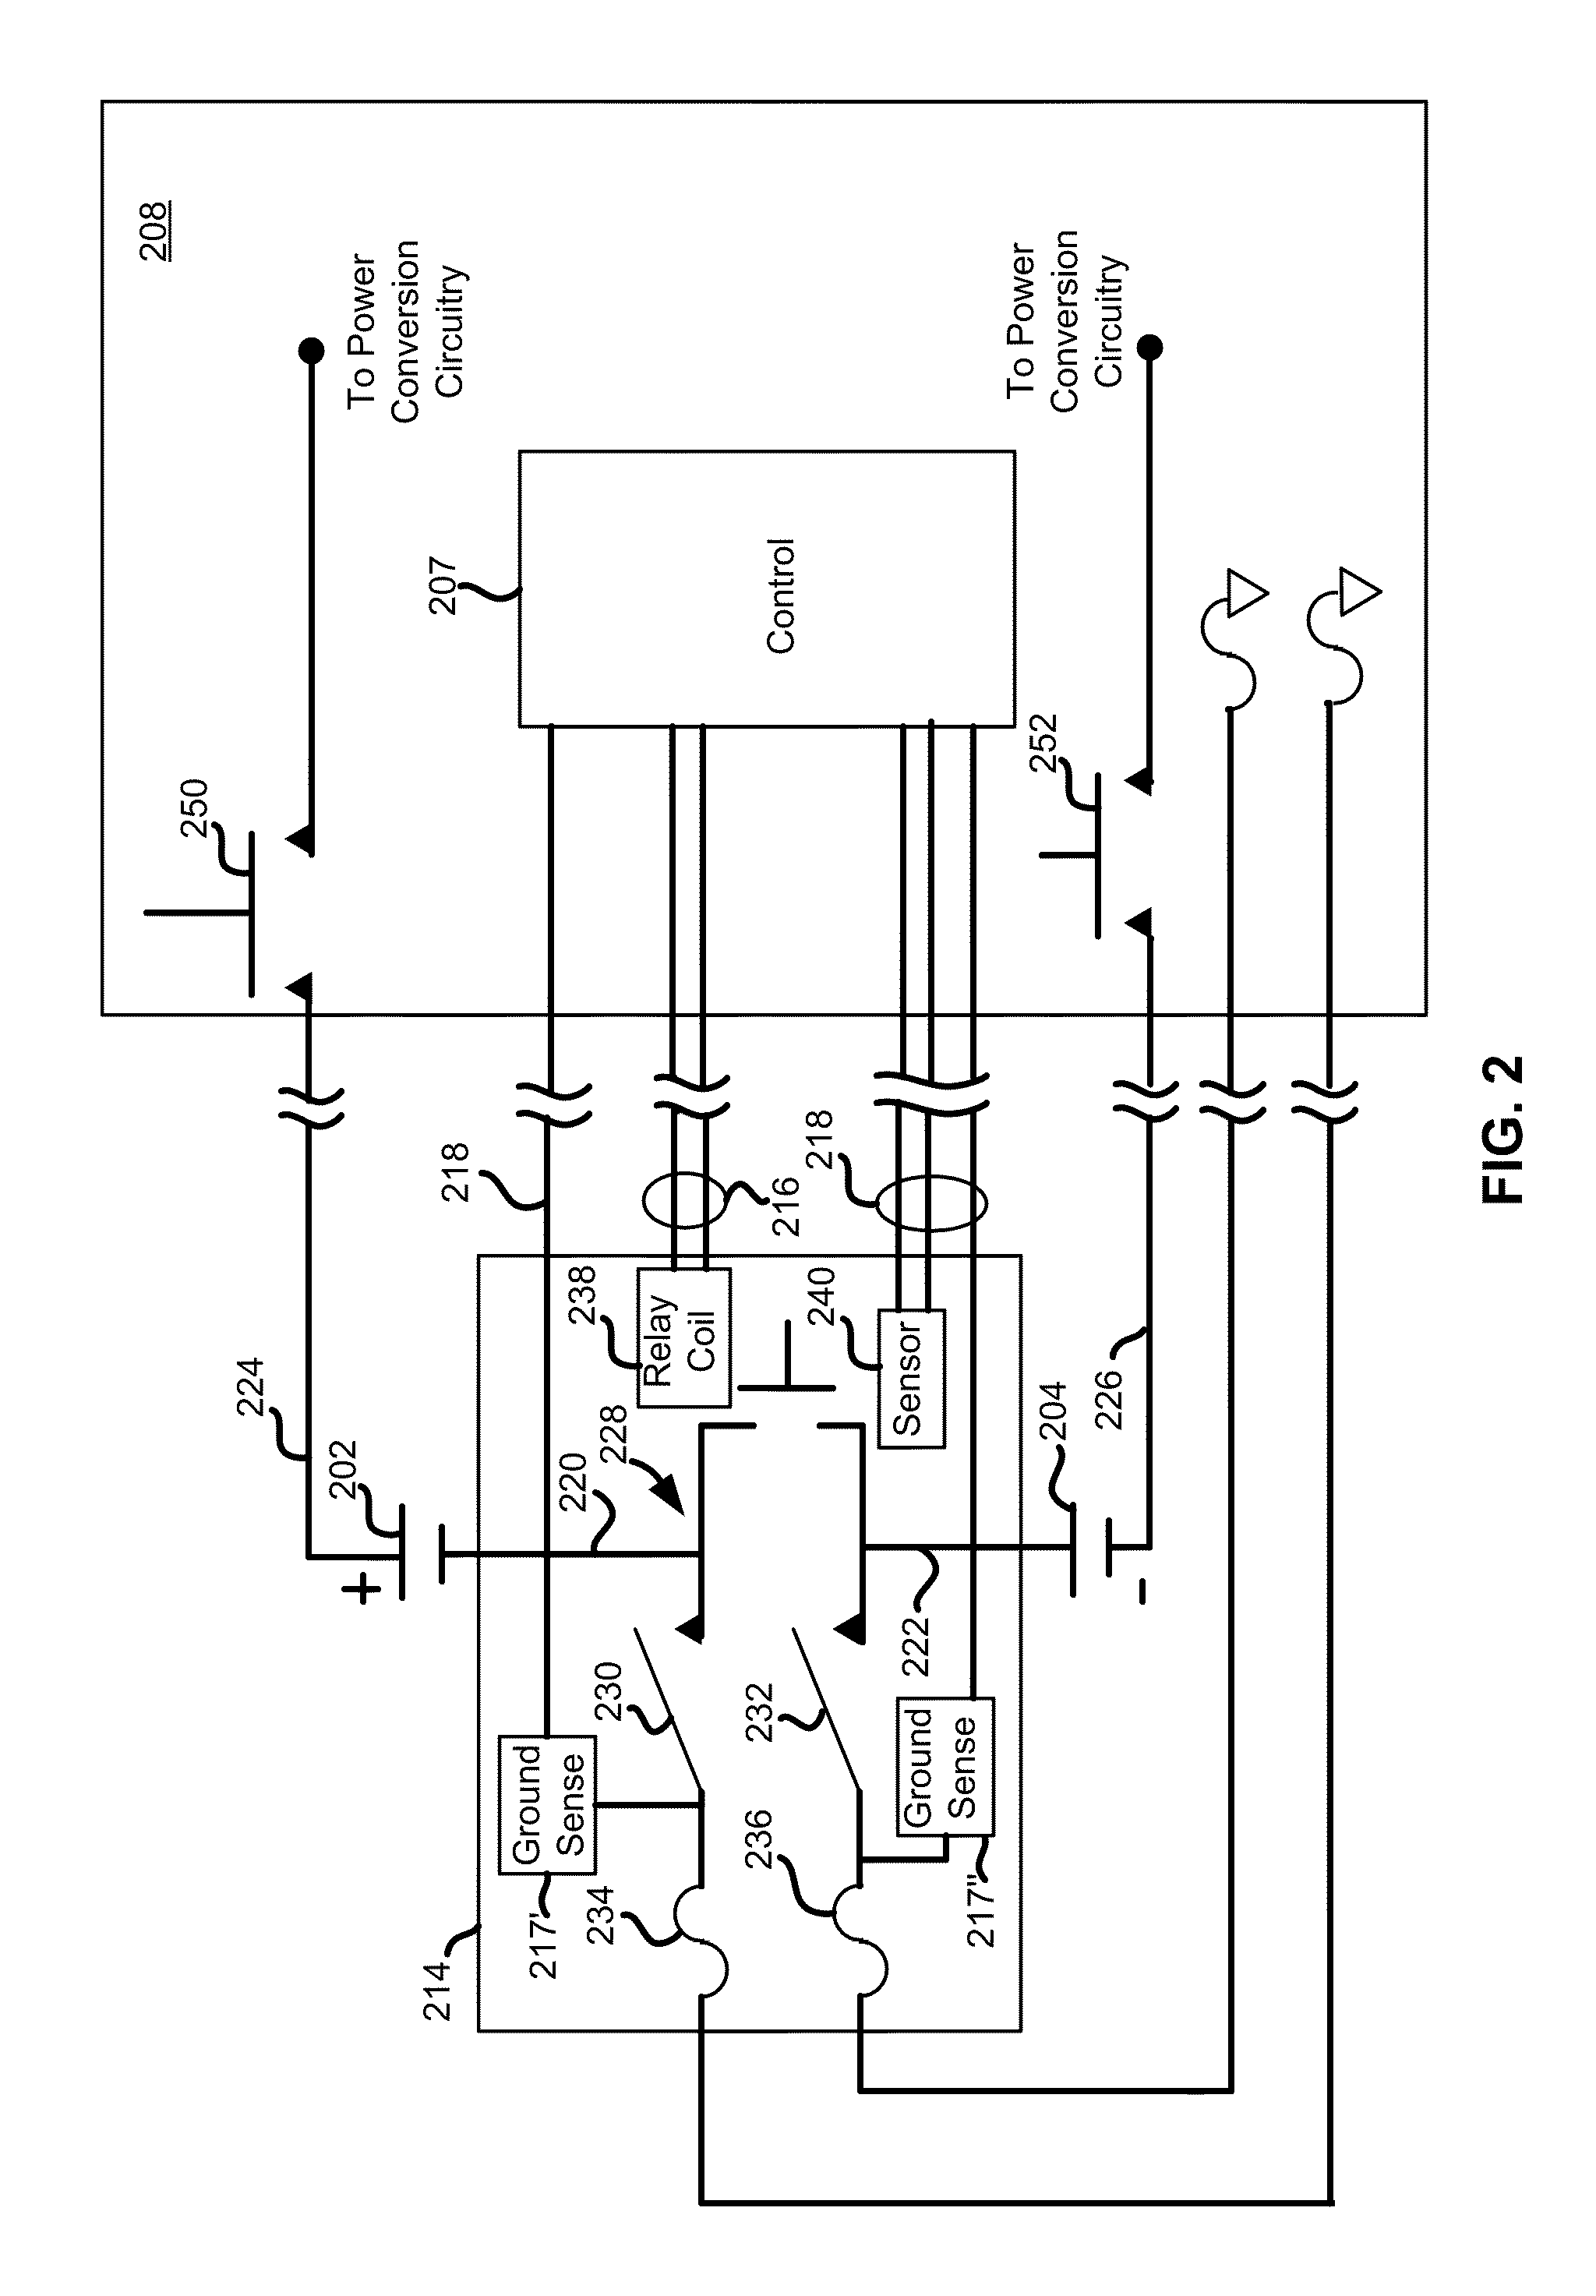 System, method, and apparatus for remotely coupling photovoltaic arrays